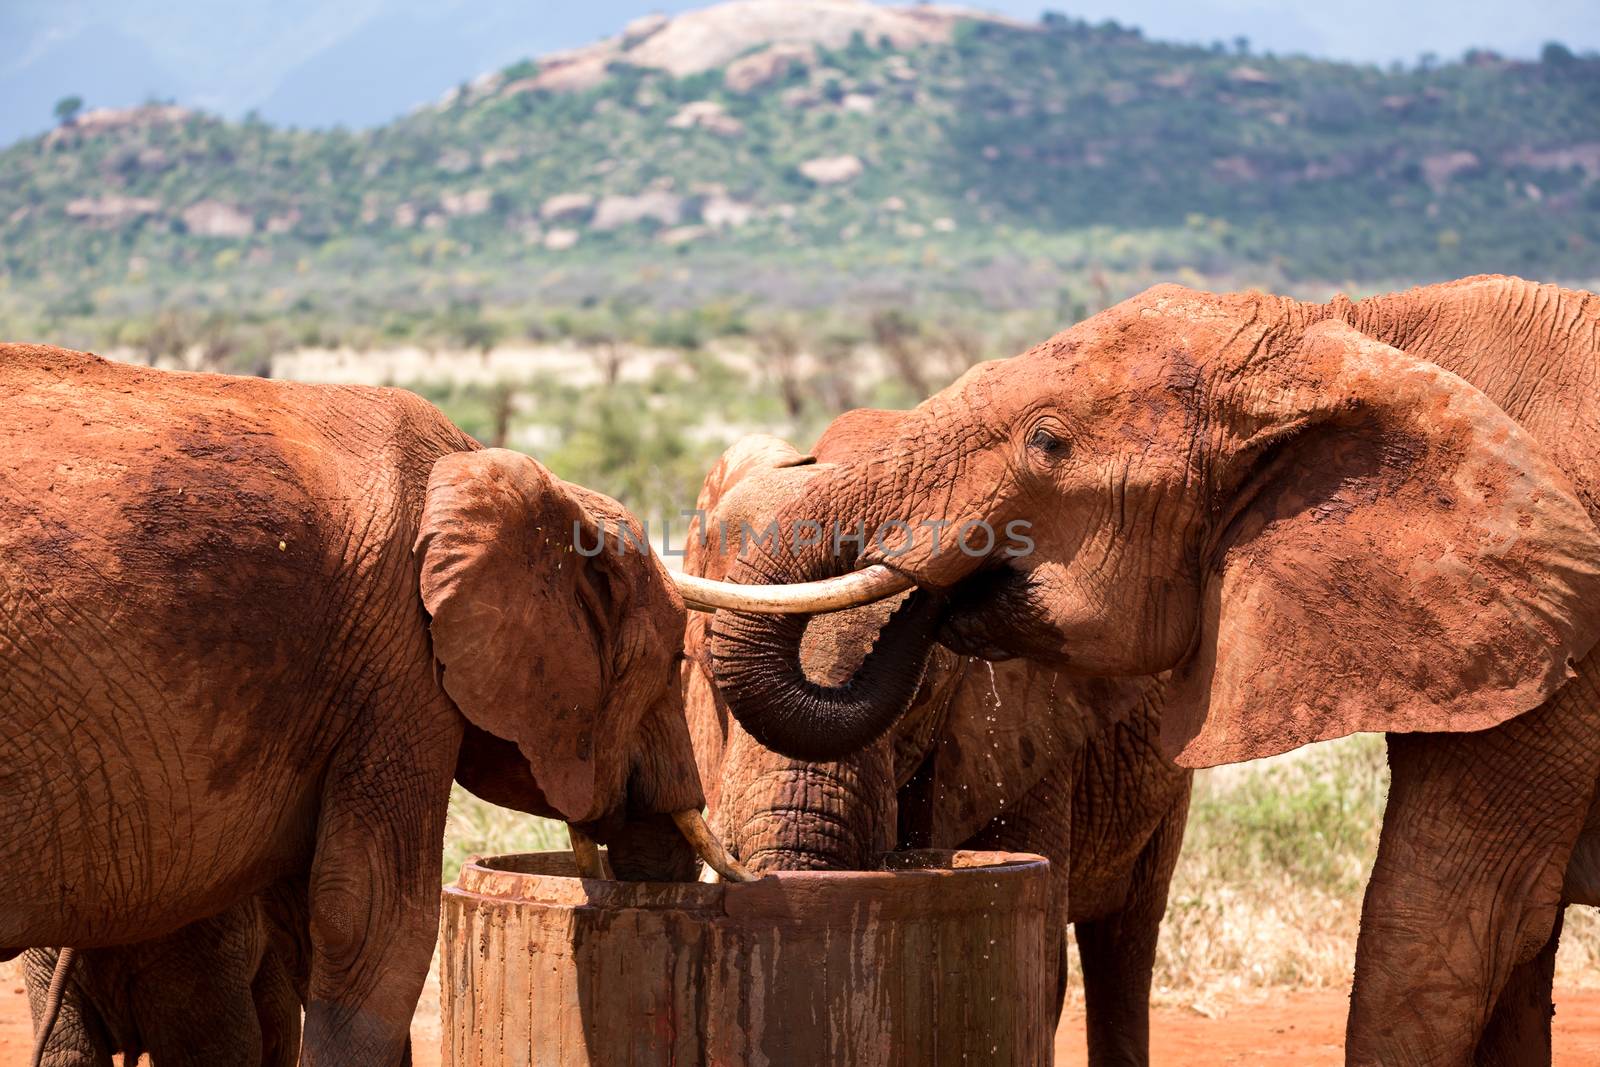 Some elephants drink water from a water tank